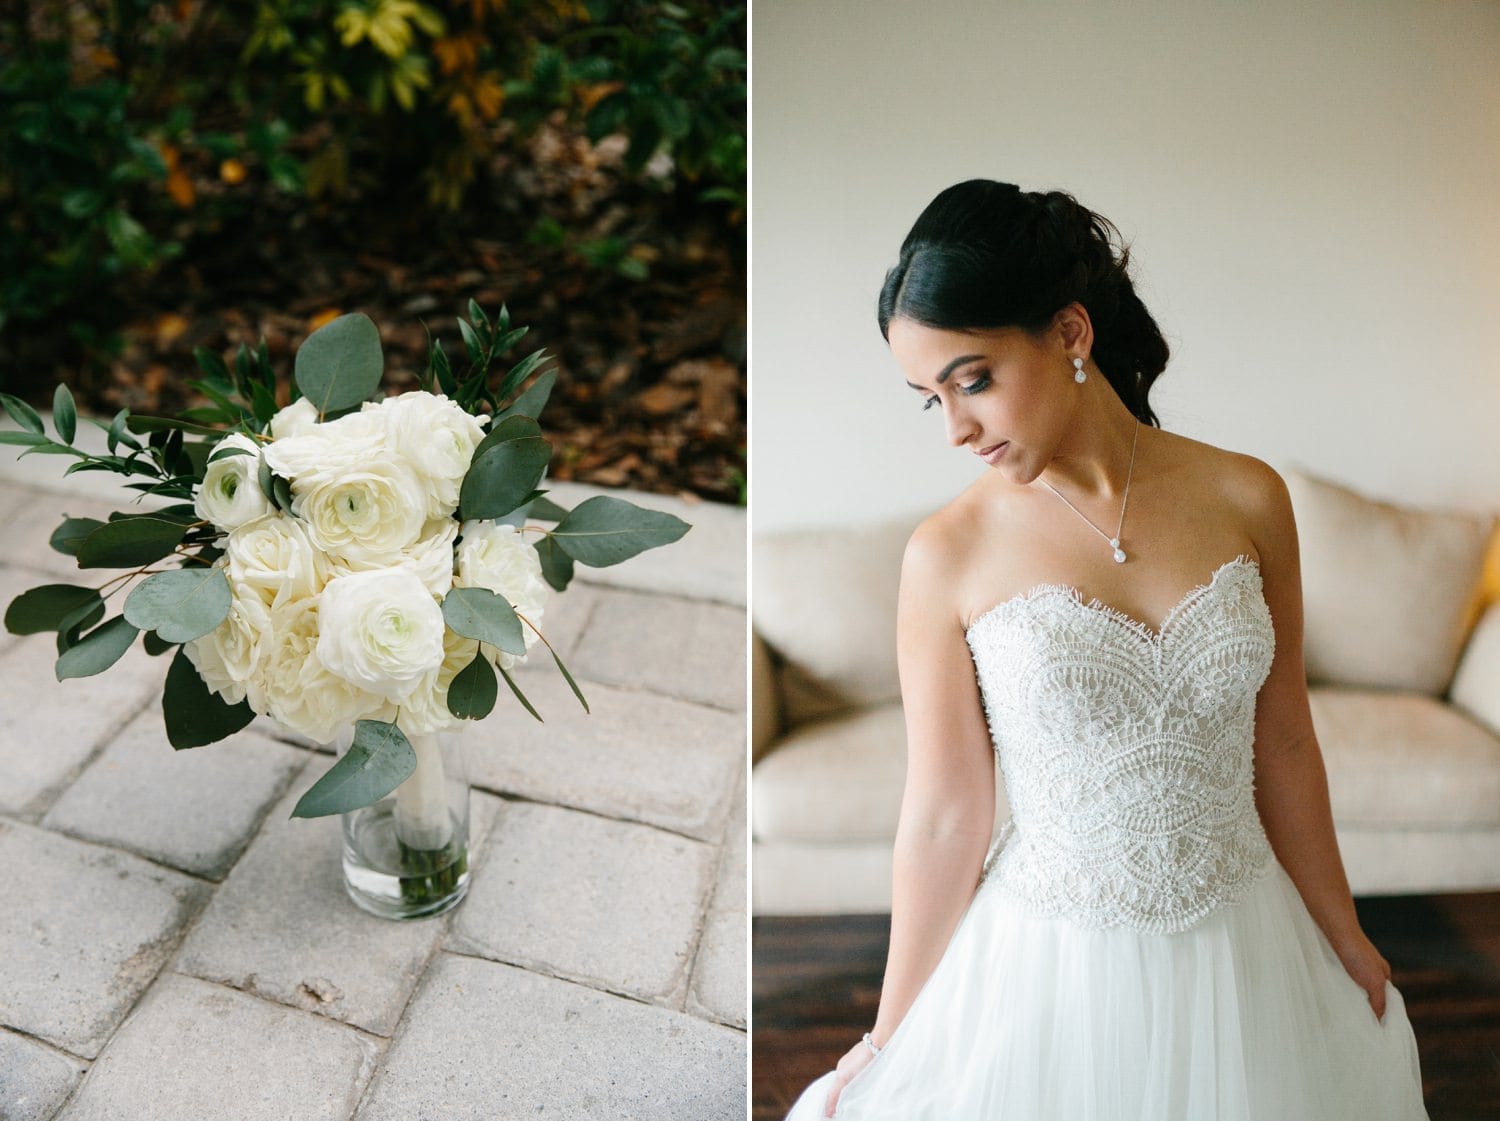 Bridal portrait and Bridal bouquet. Rustic Chic Wedding at October Oaks